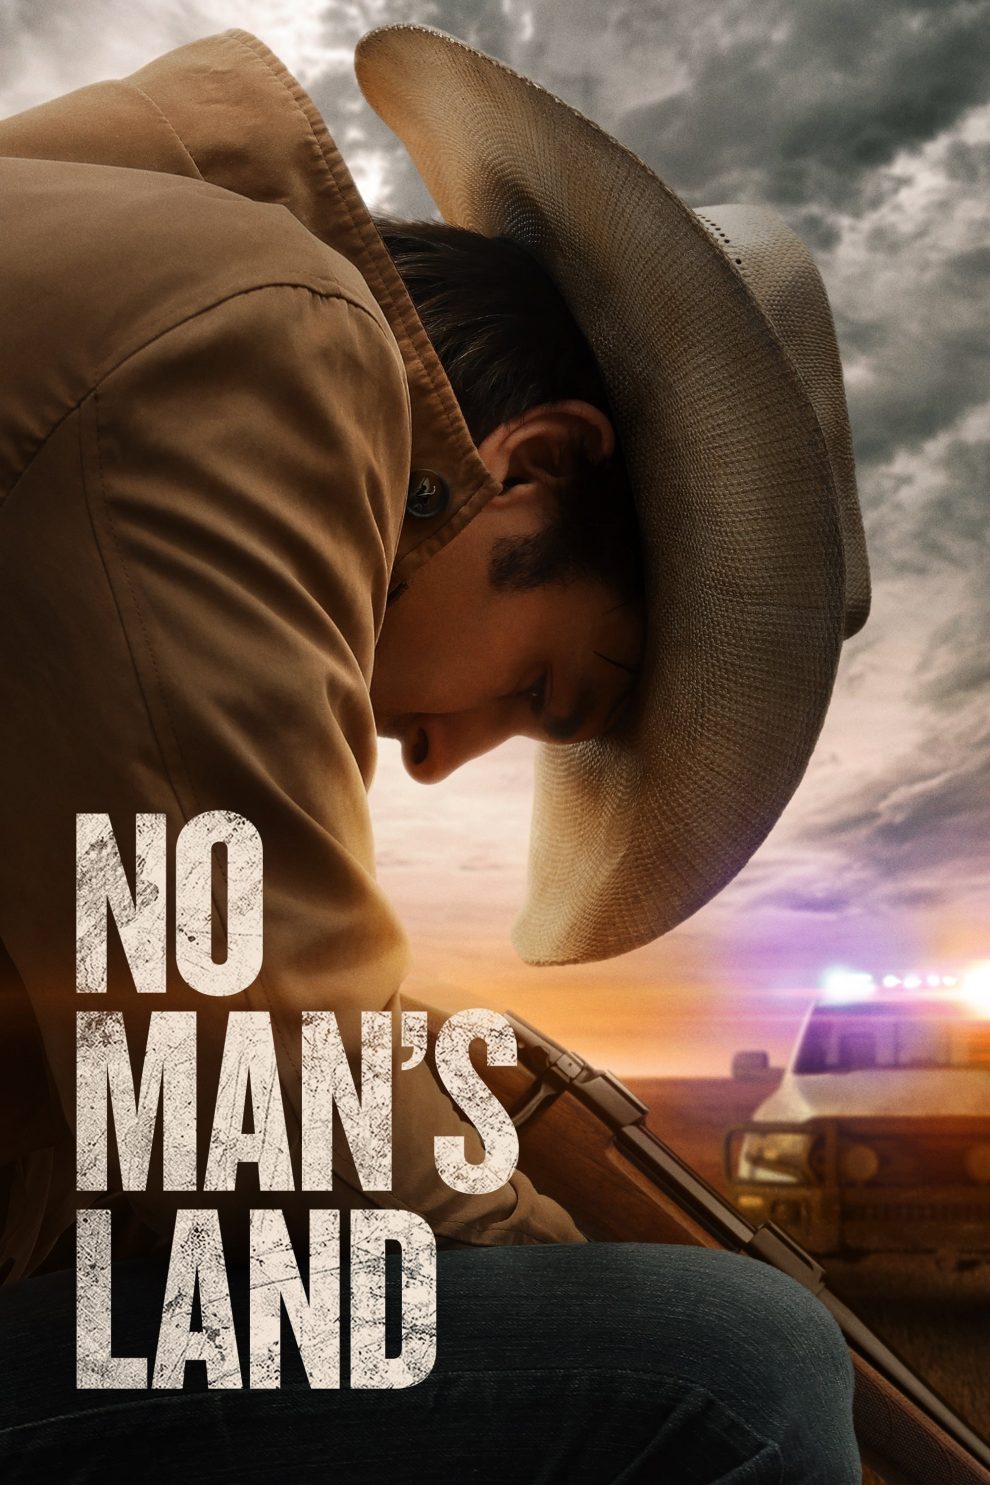 Poster for the movie "No Man's Land"